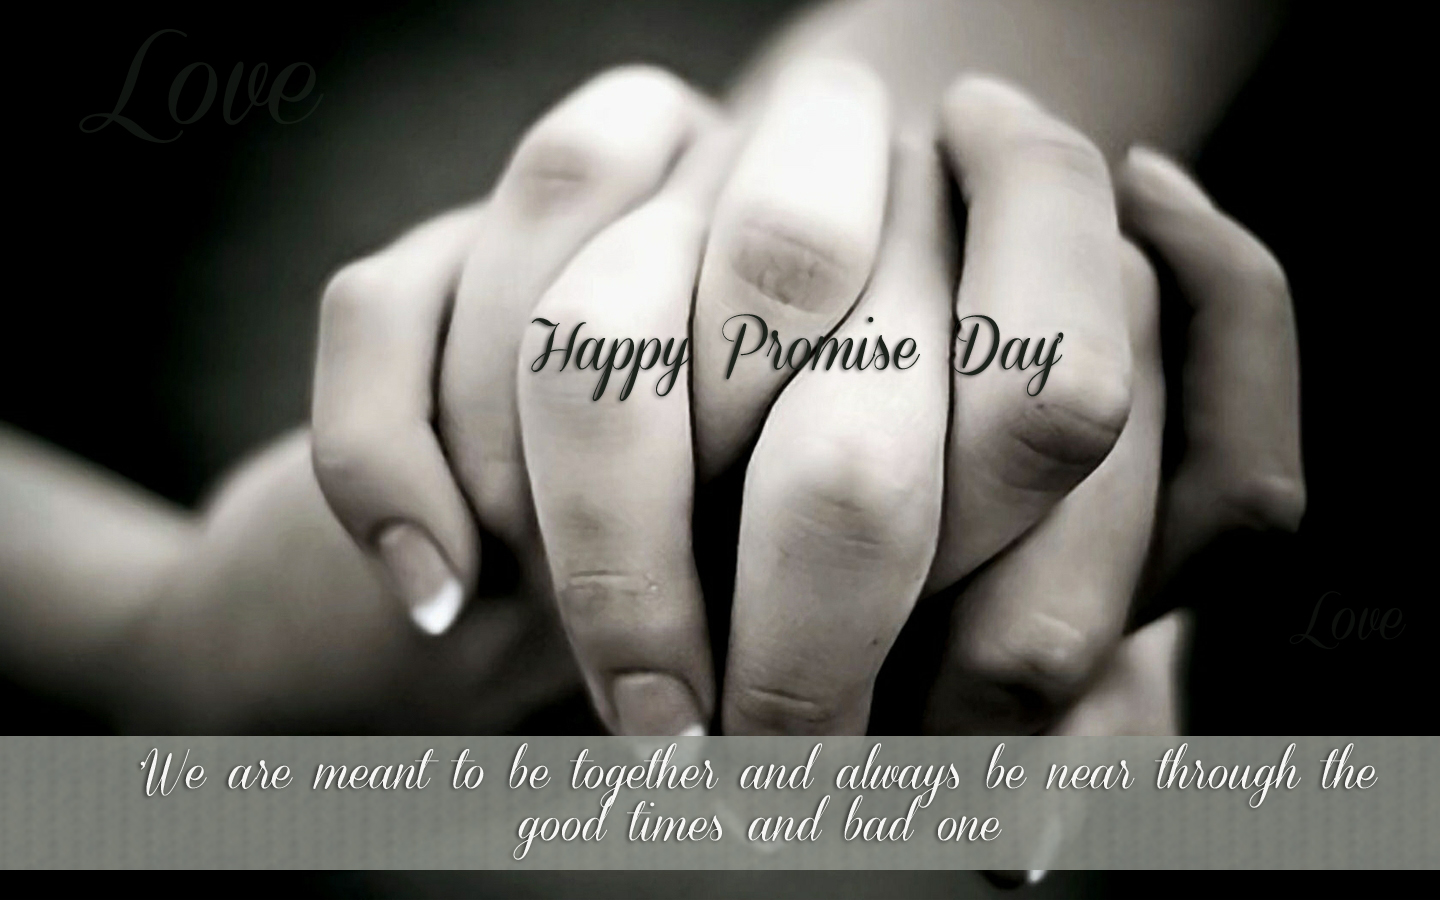 happy promise day we are meant to be together and always be near through the good times and bad one